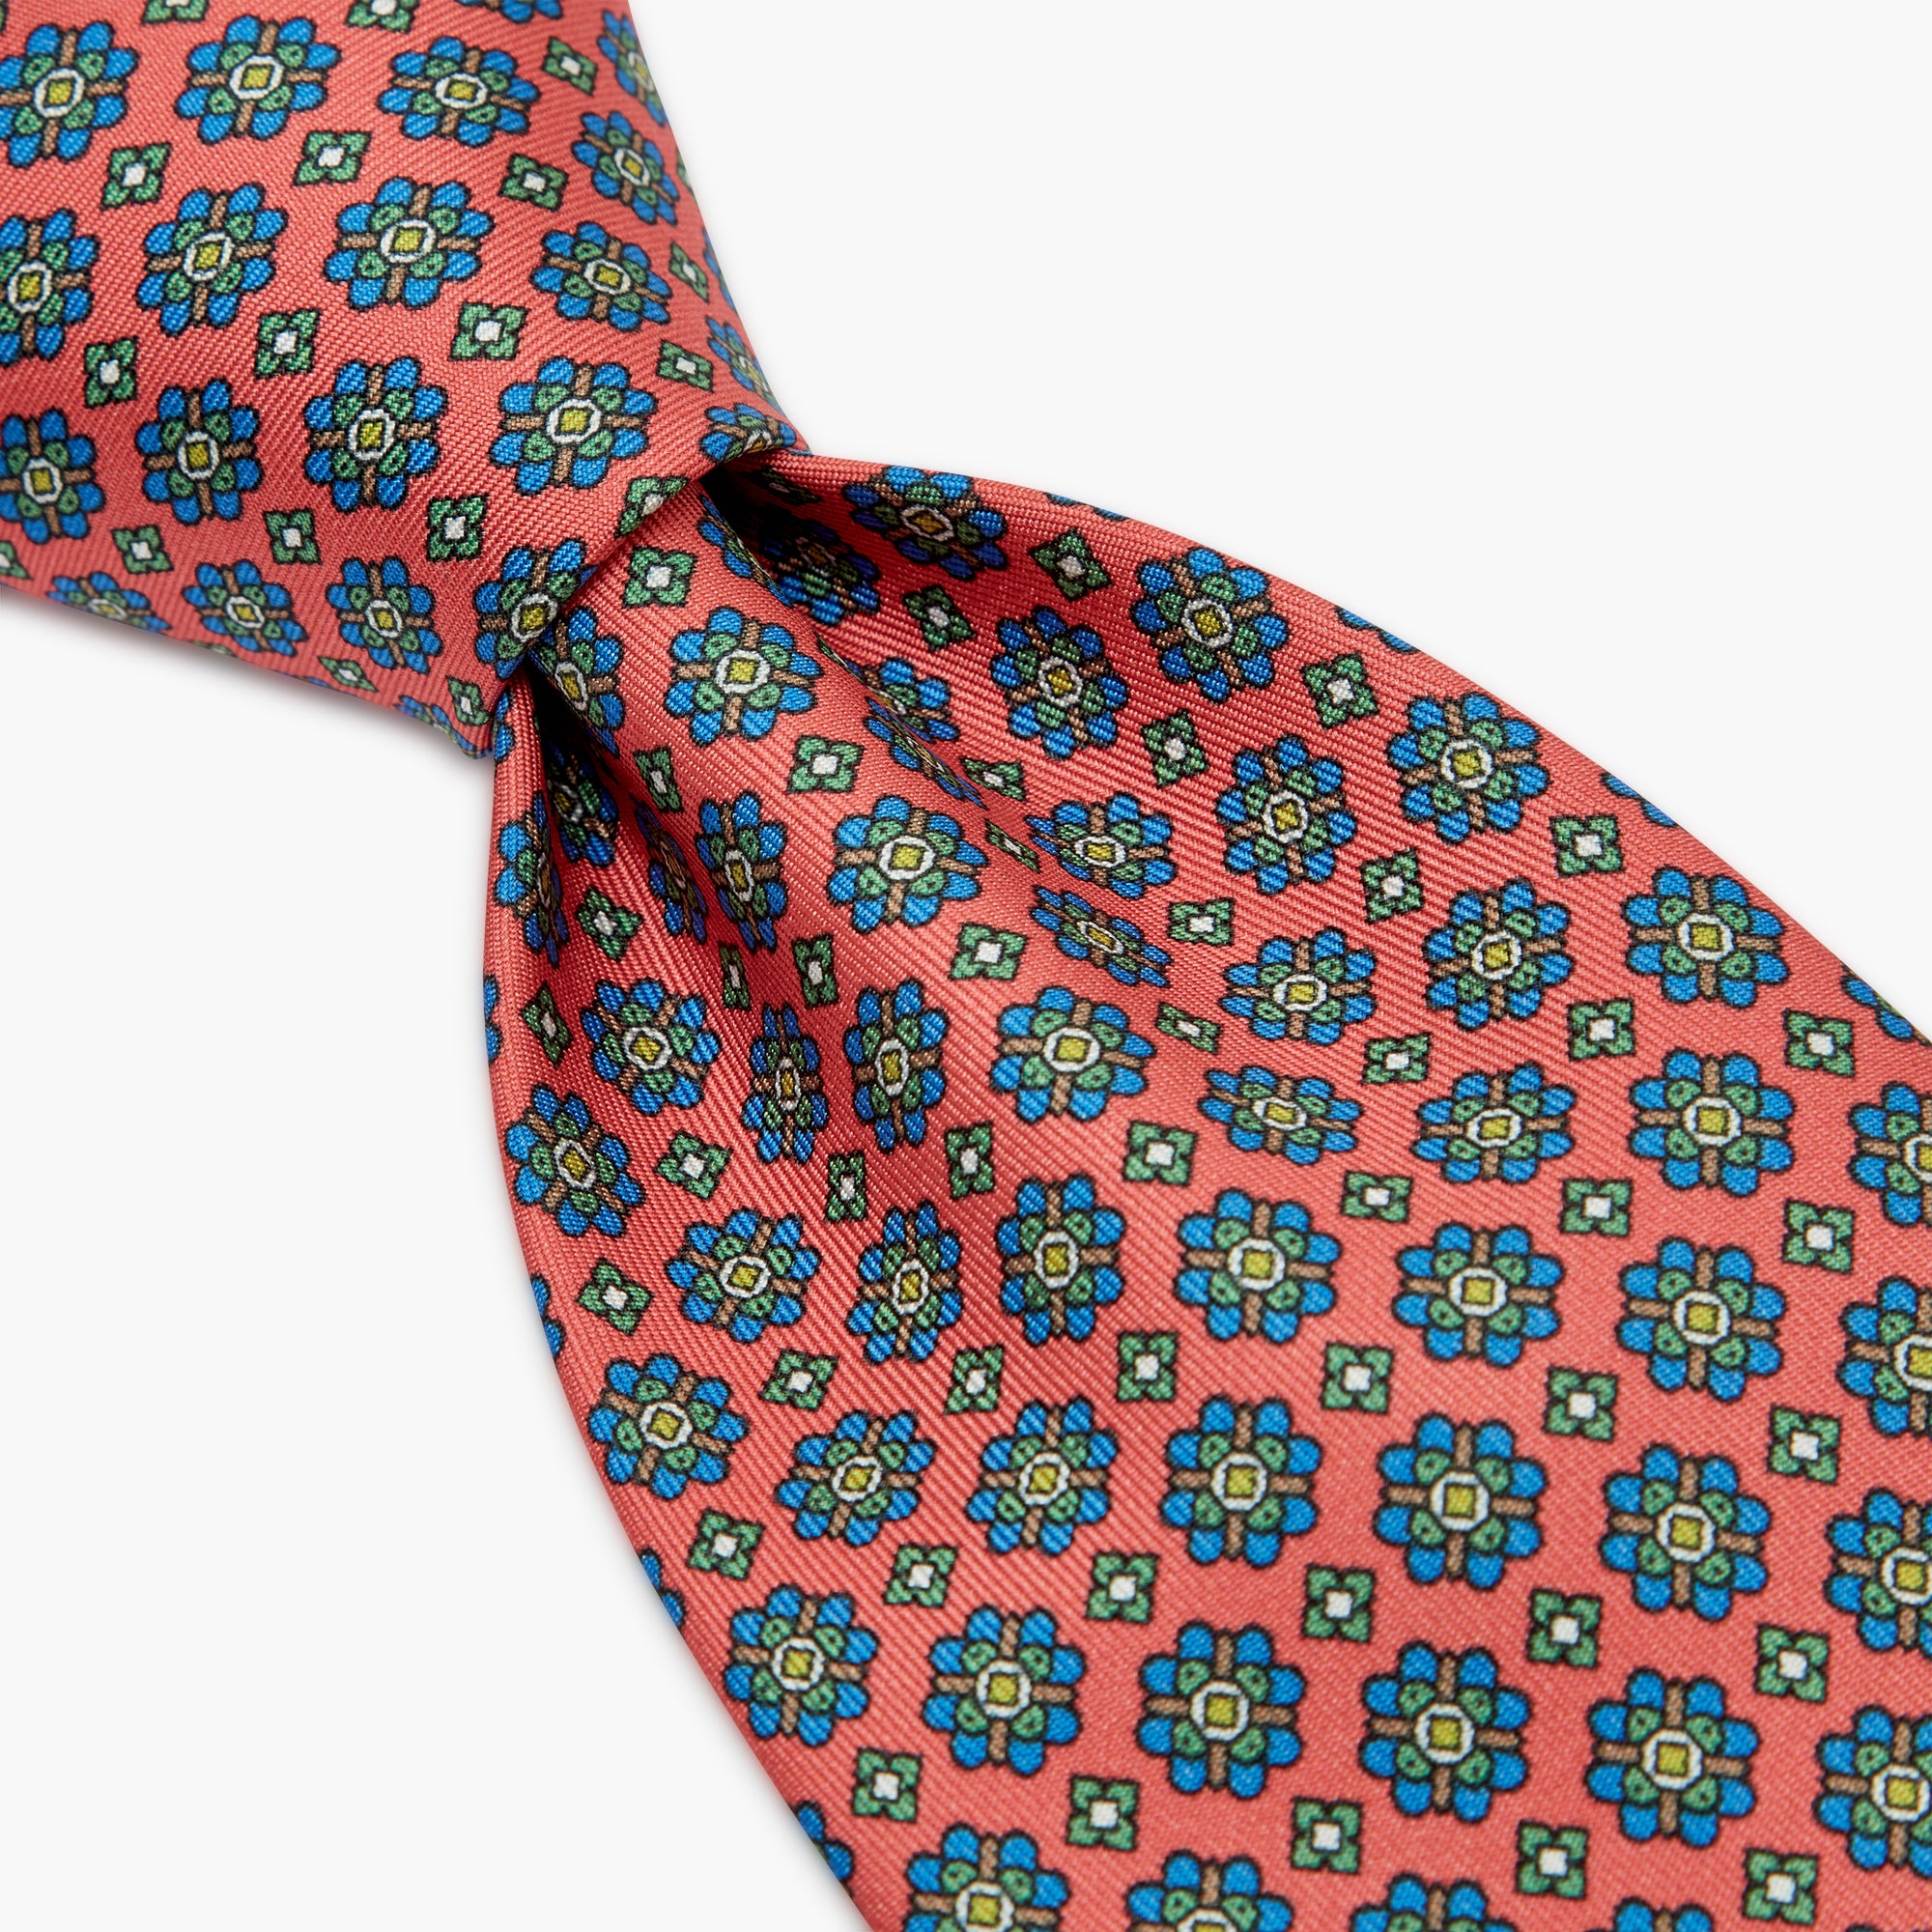 3-Fold Floral Printed Italian Silk Tie - Coral Red